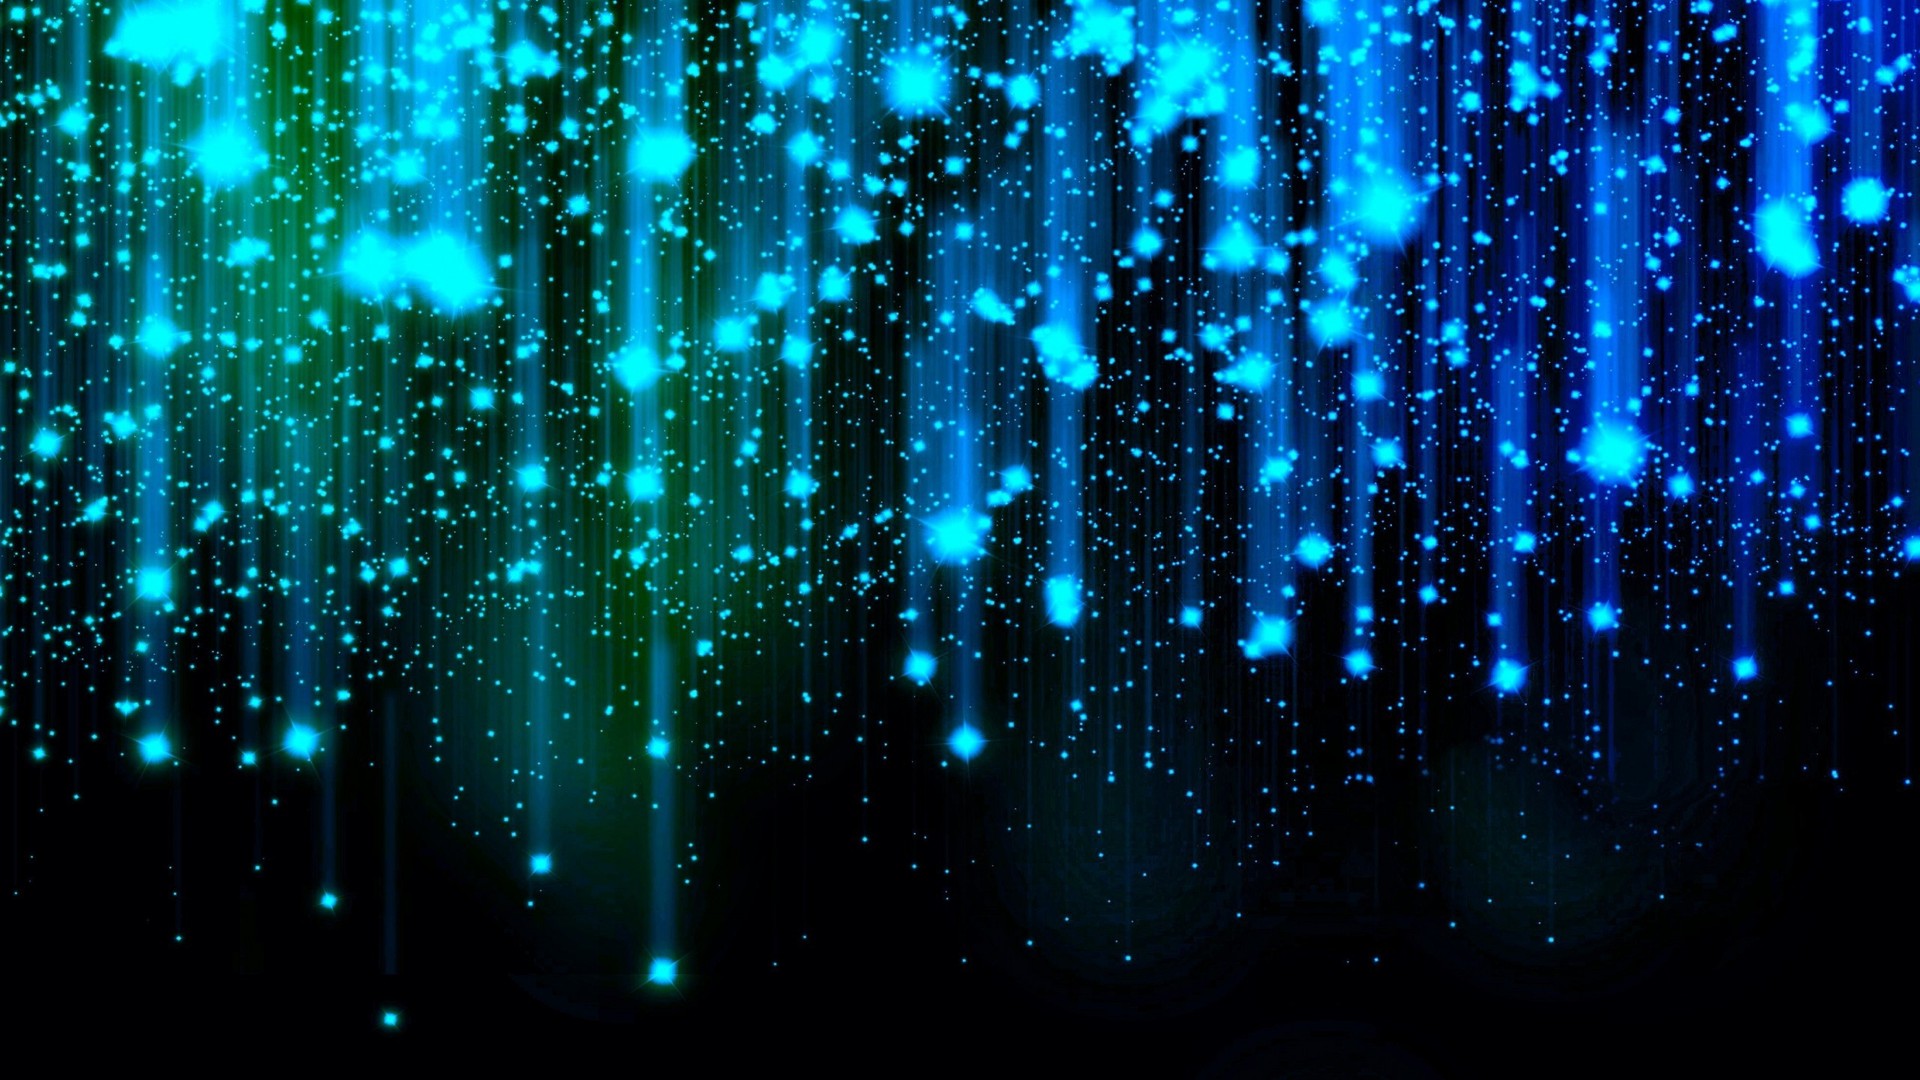 Abstract stars falling wallpapers HD.